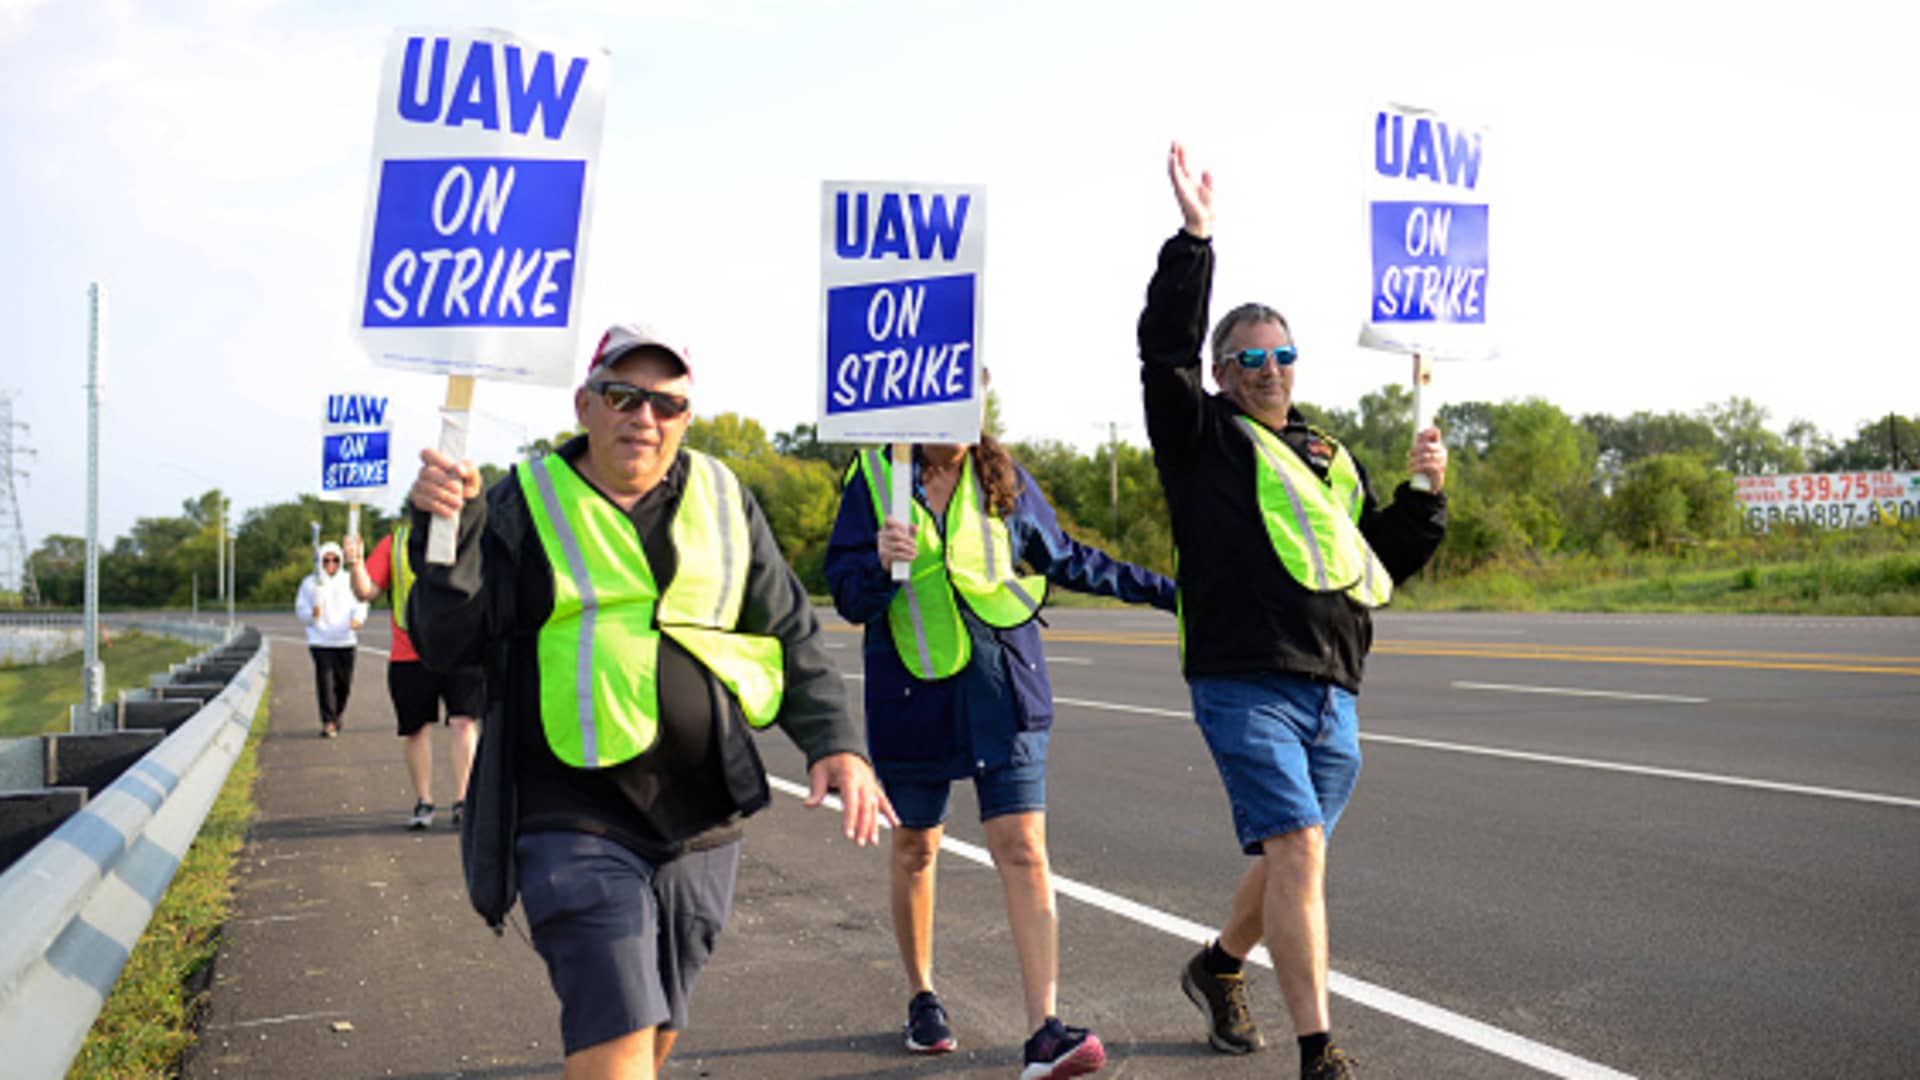 UAW will strike at more U.S. auto plants if serious progress isn’t made